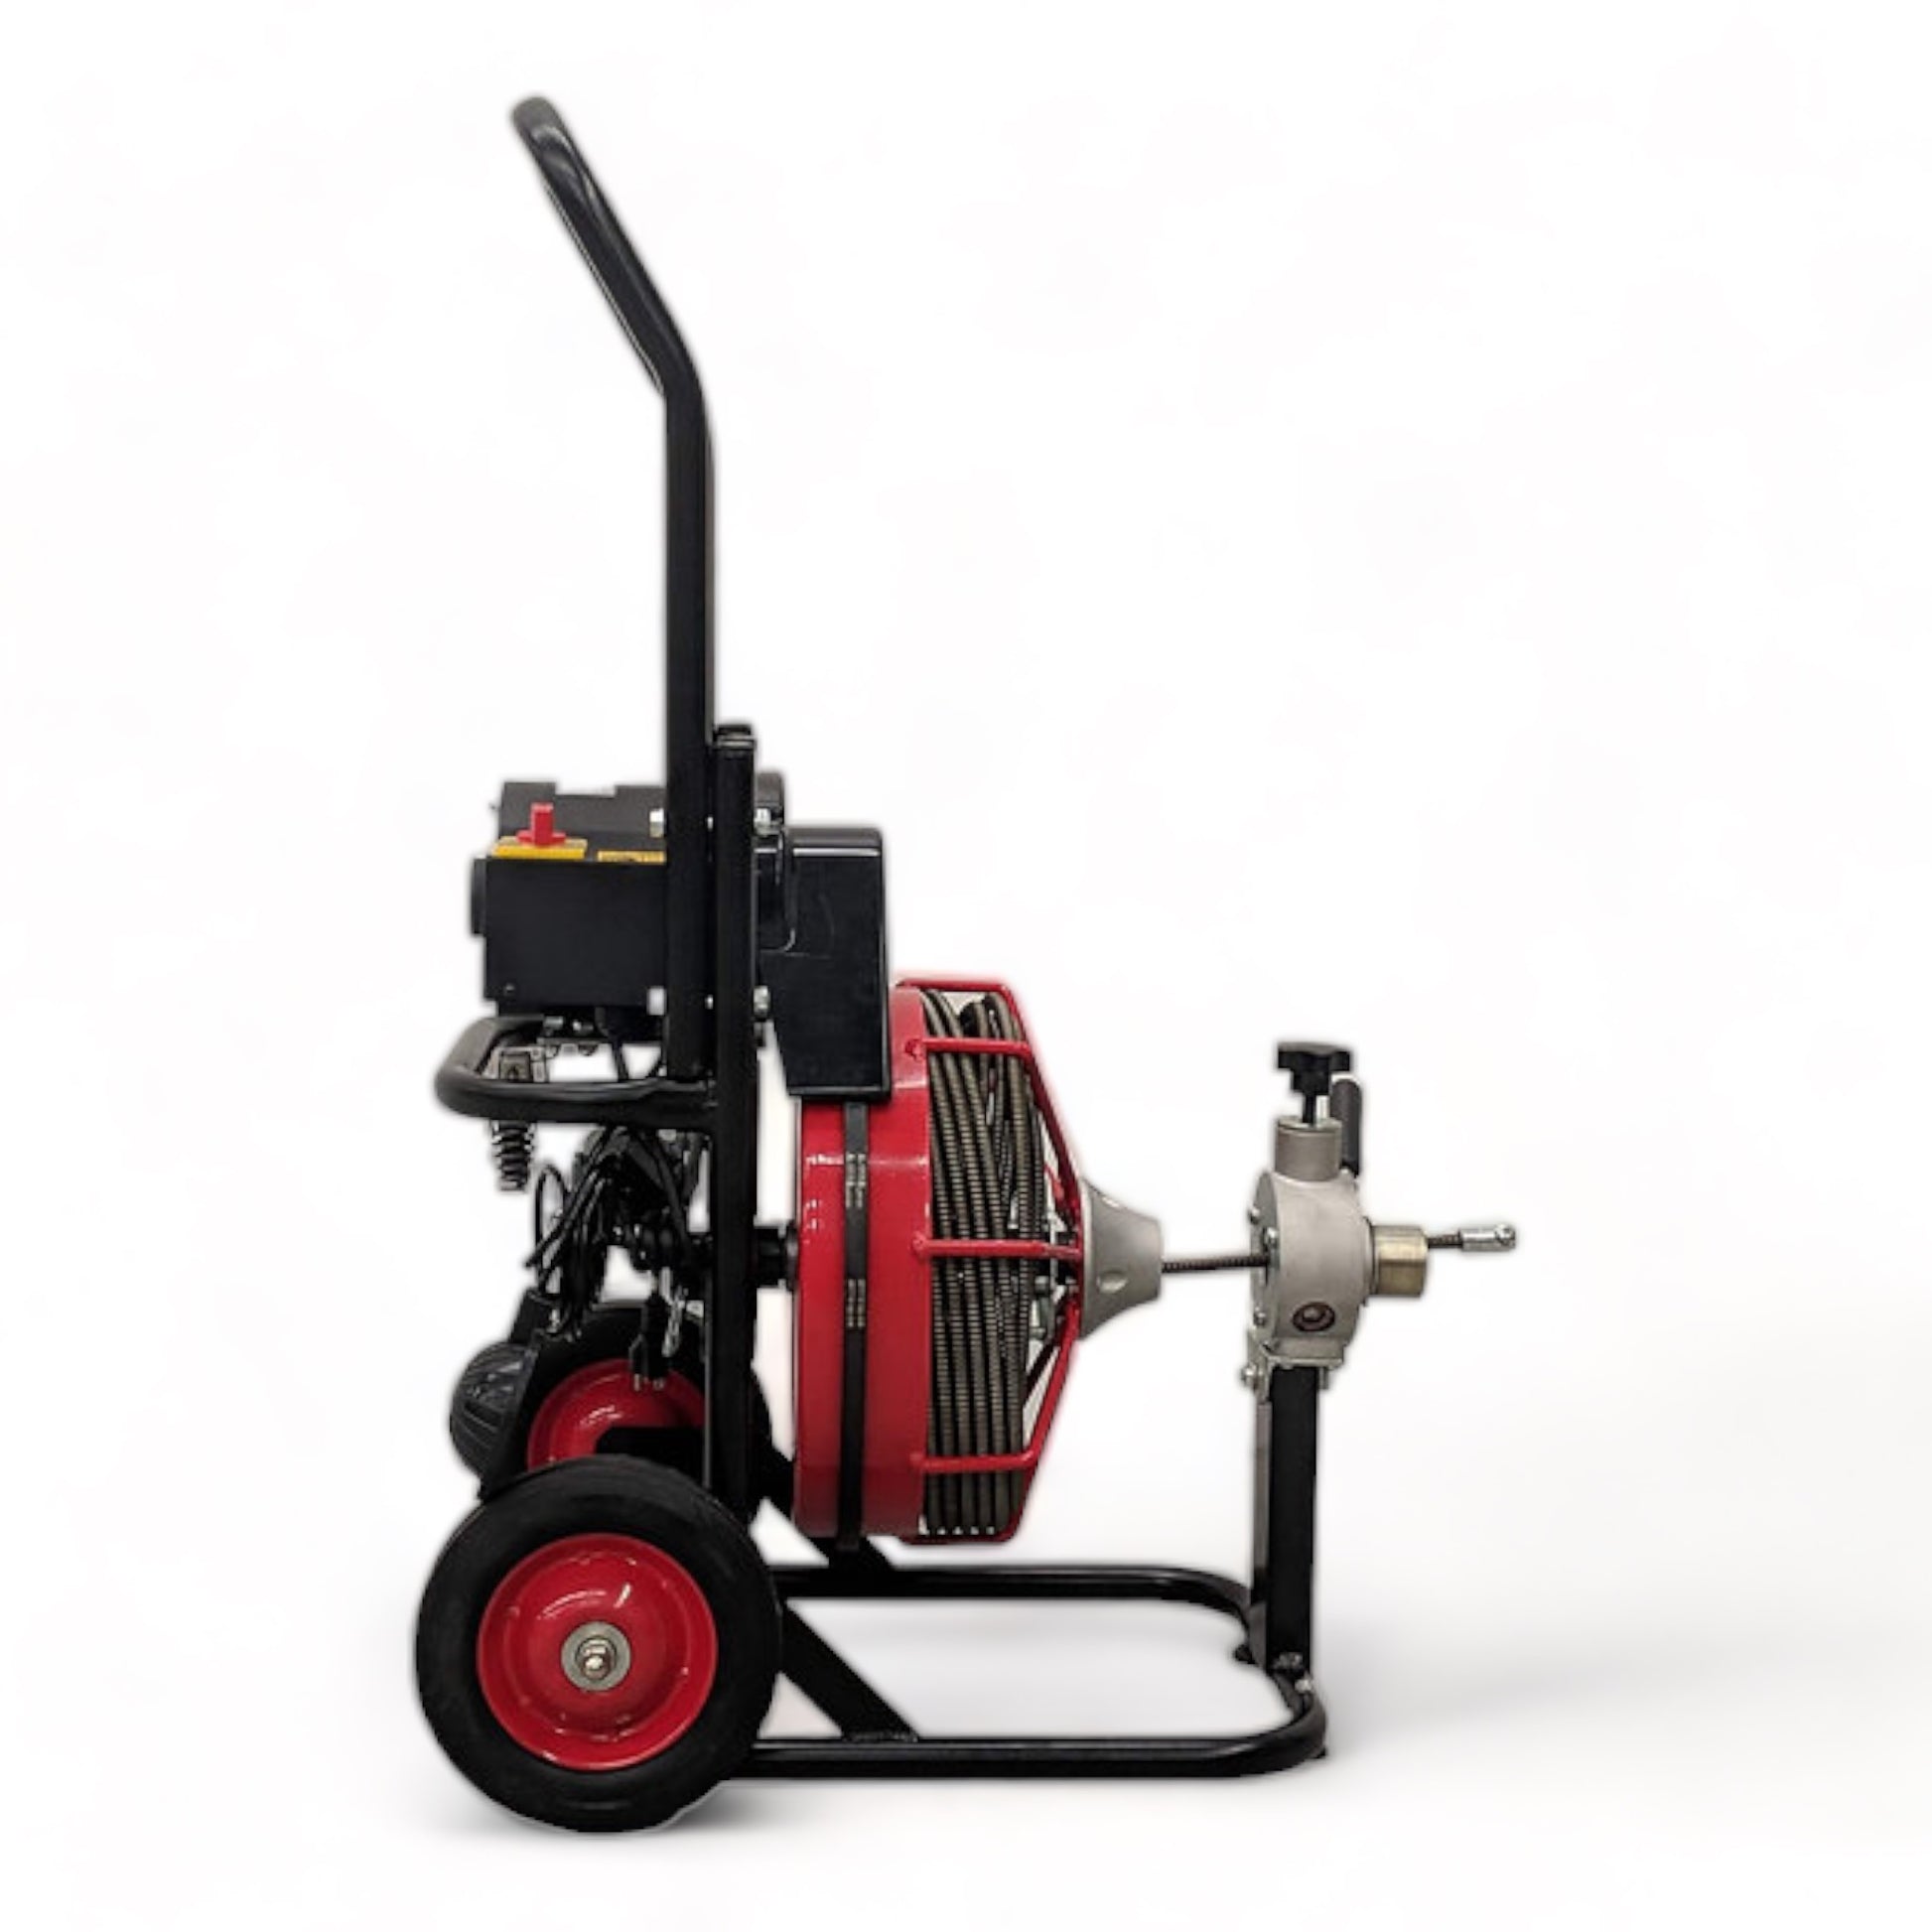 D330ZK - 75 Foot Power Feed Drain Cleaner